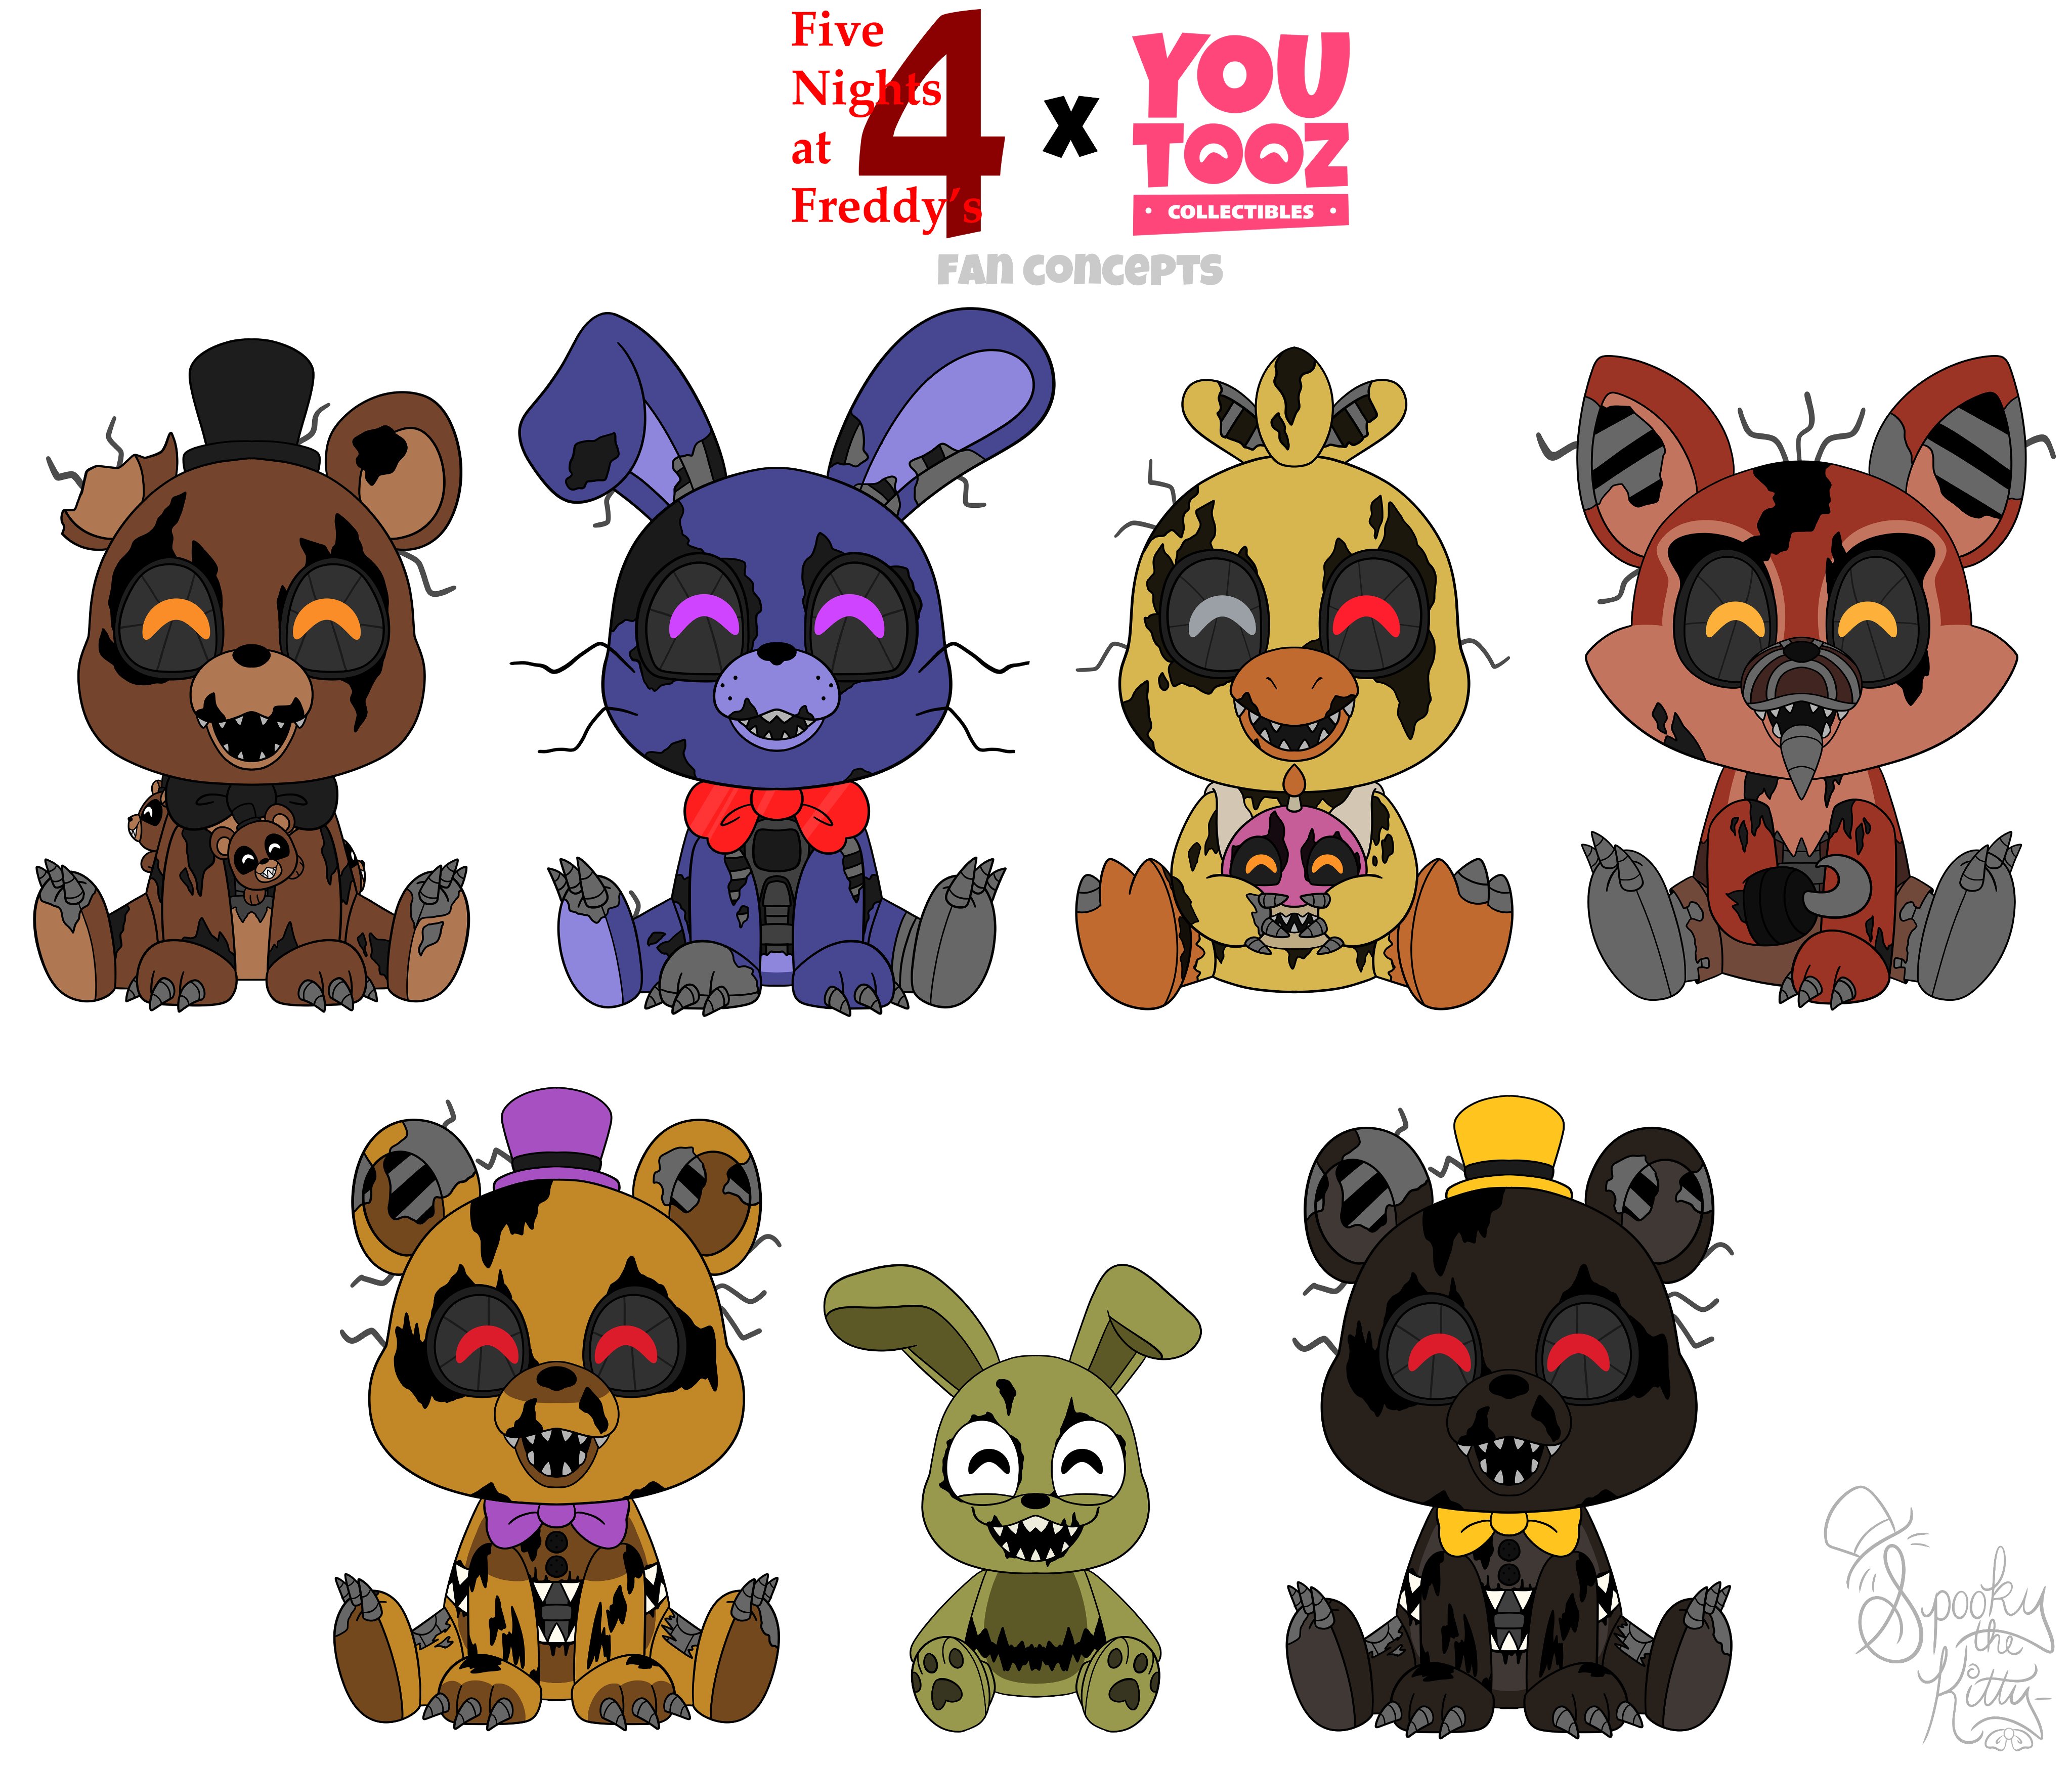 Spooky 🦀 on X: Full Fnaf 4 @youtooz plush set fan concepts. With how much  fnaf stuff youtooz is already making, I'd love for them to do some fnaf 4  plushies in